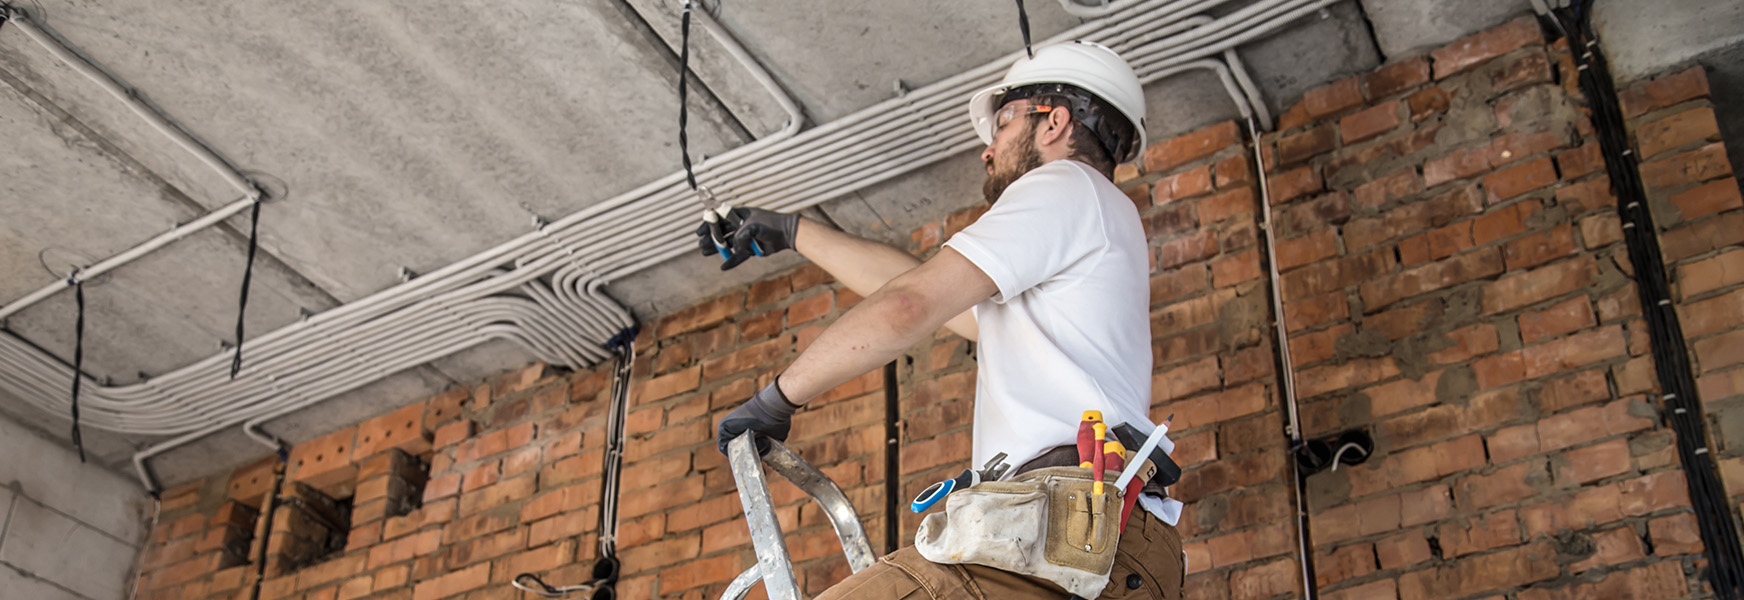 Man wearing PPE inspecting electrical outlet